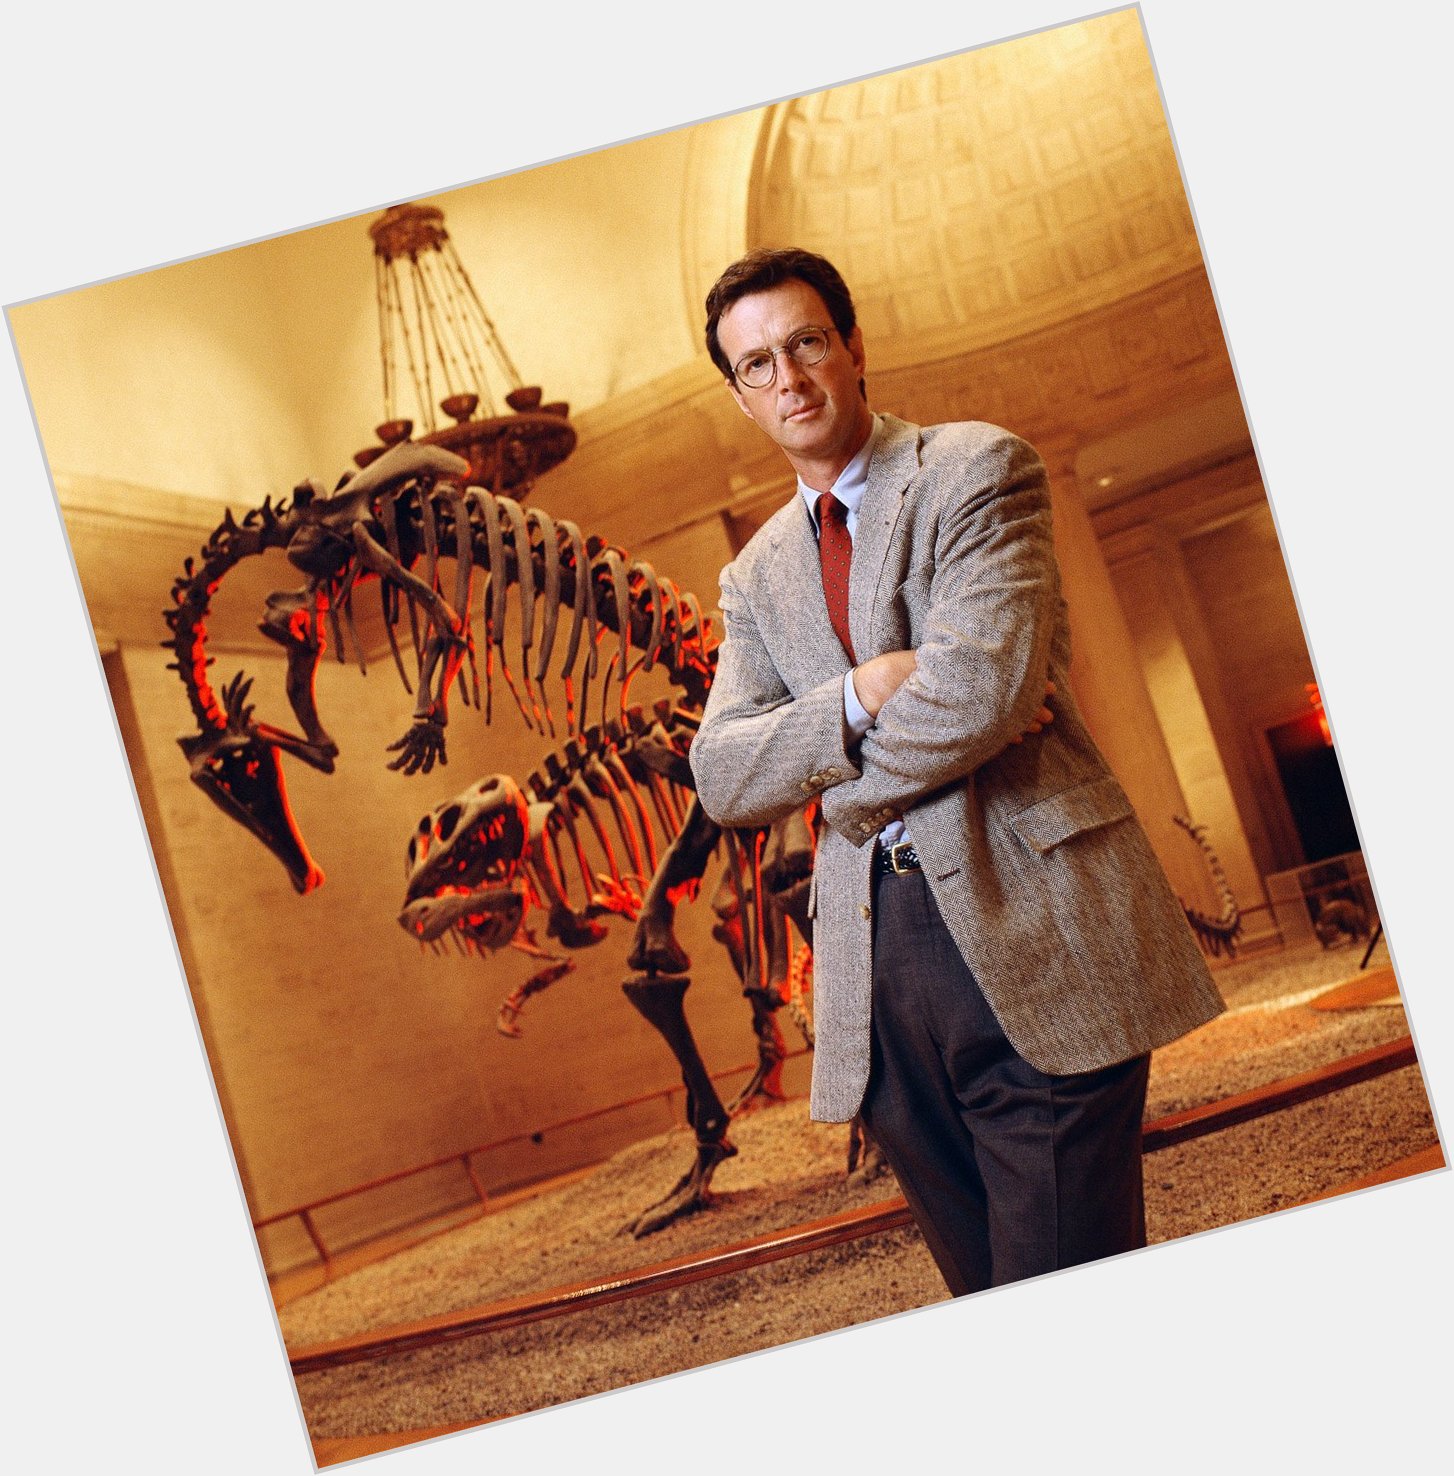 Without him, there is no today. Happy birthday, Michael Crichton! 